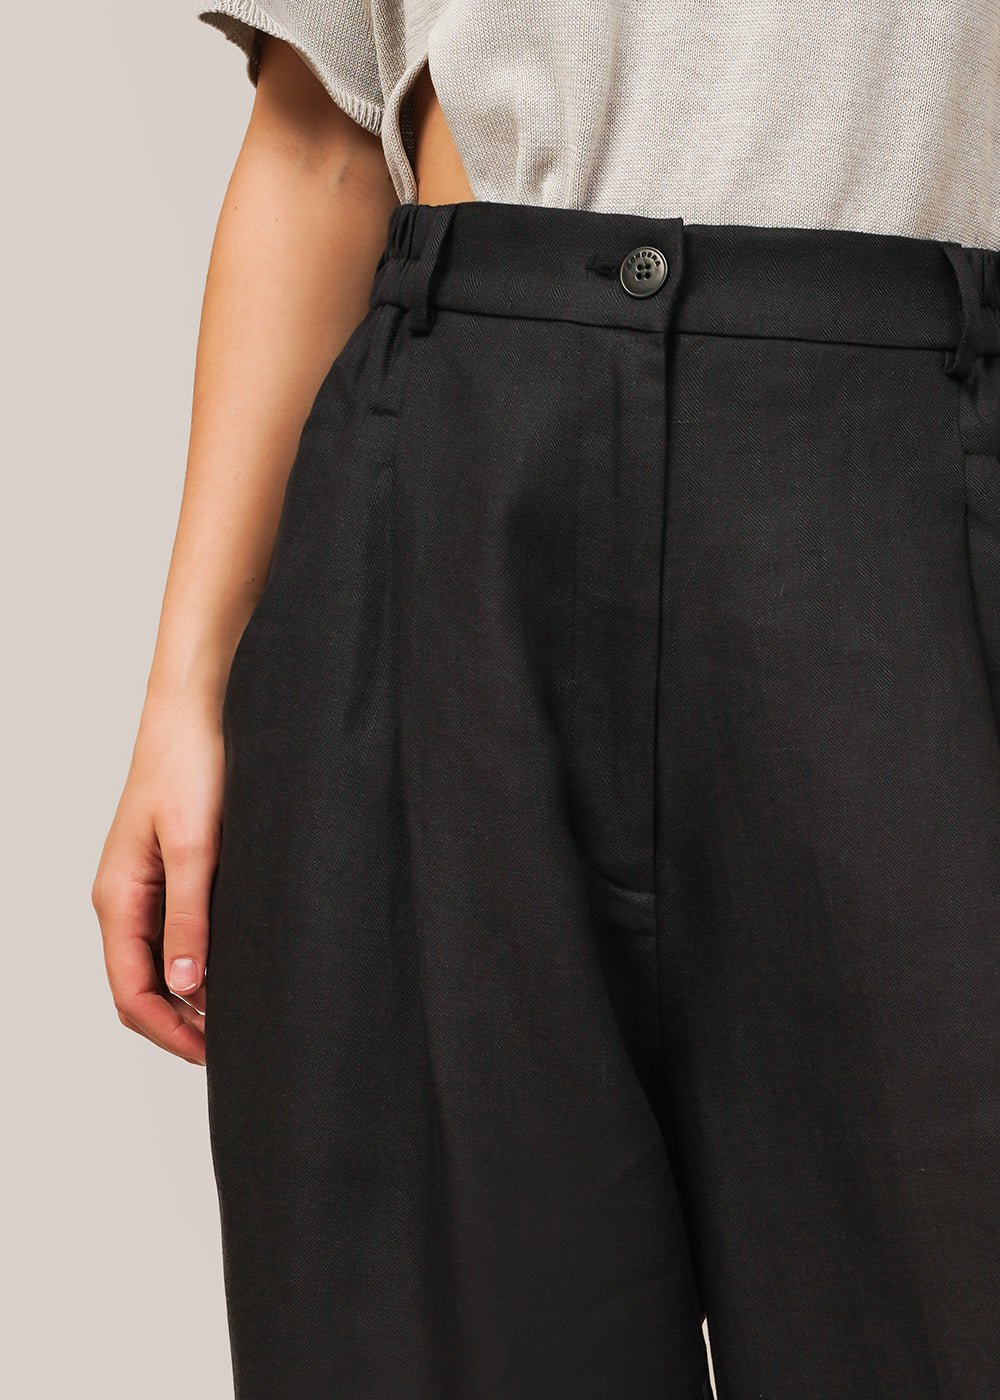 Cordera Black New Age Linen Pants - New Classics Studios Sustainable Ethical Fashion Canada